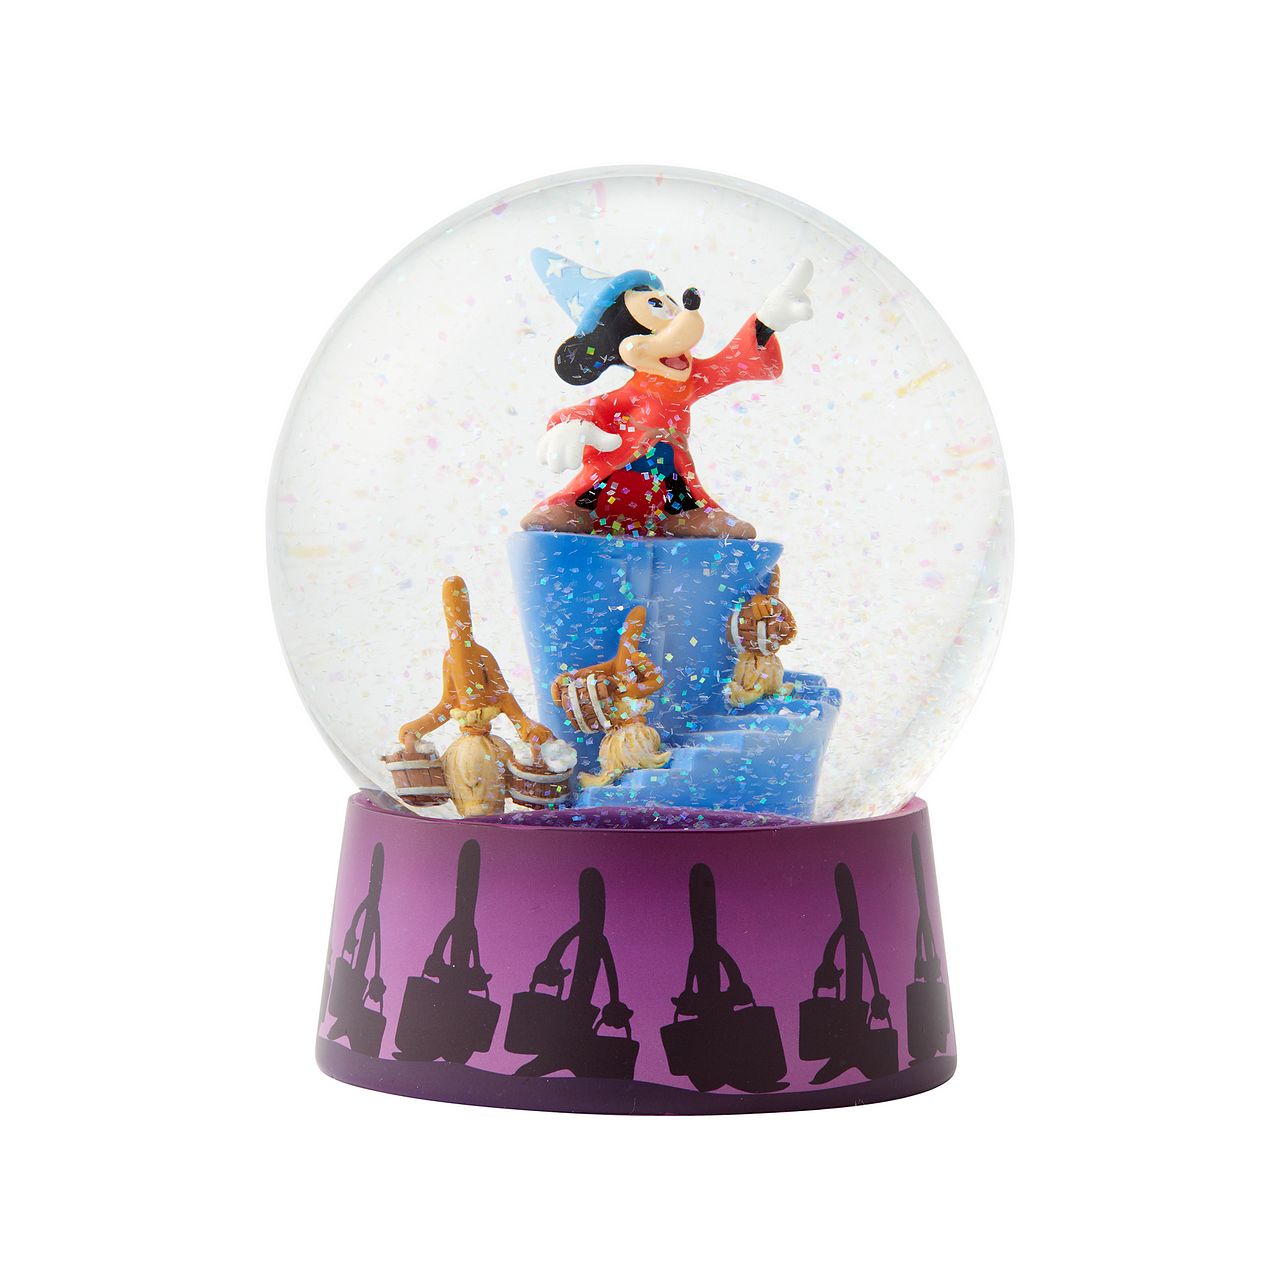 Disney Mickey Mouse Fantasia Waterball  This waterball depicts the iconic scene from Fantasia where The Sorcerer's Apprentice uses magic to make the broomsticks come alive to help Mickey Mouse with his chores.